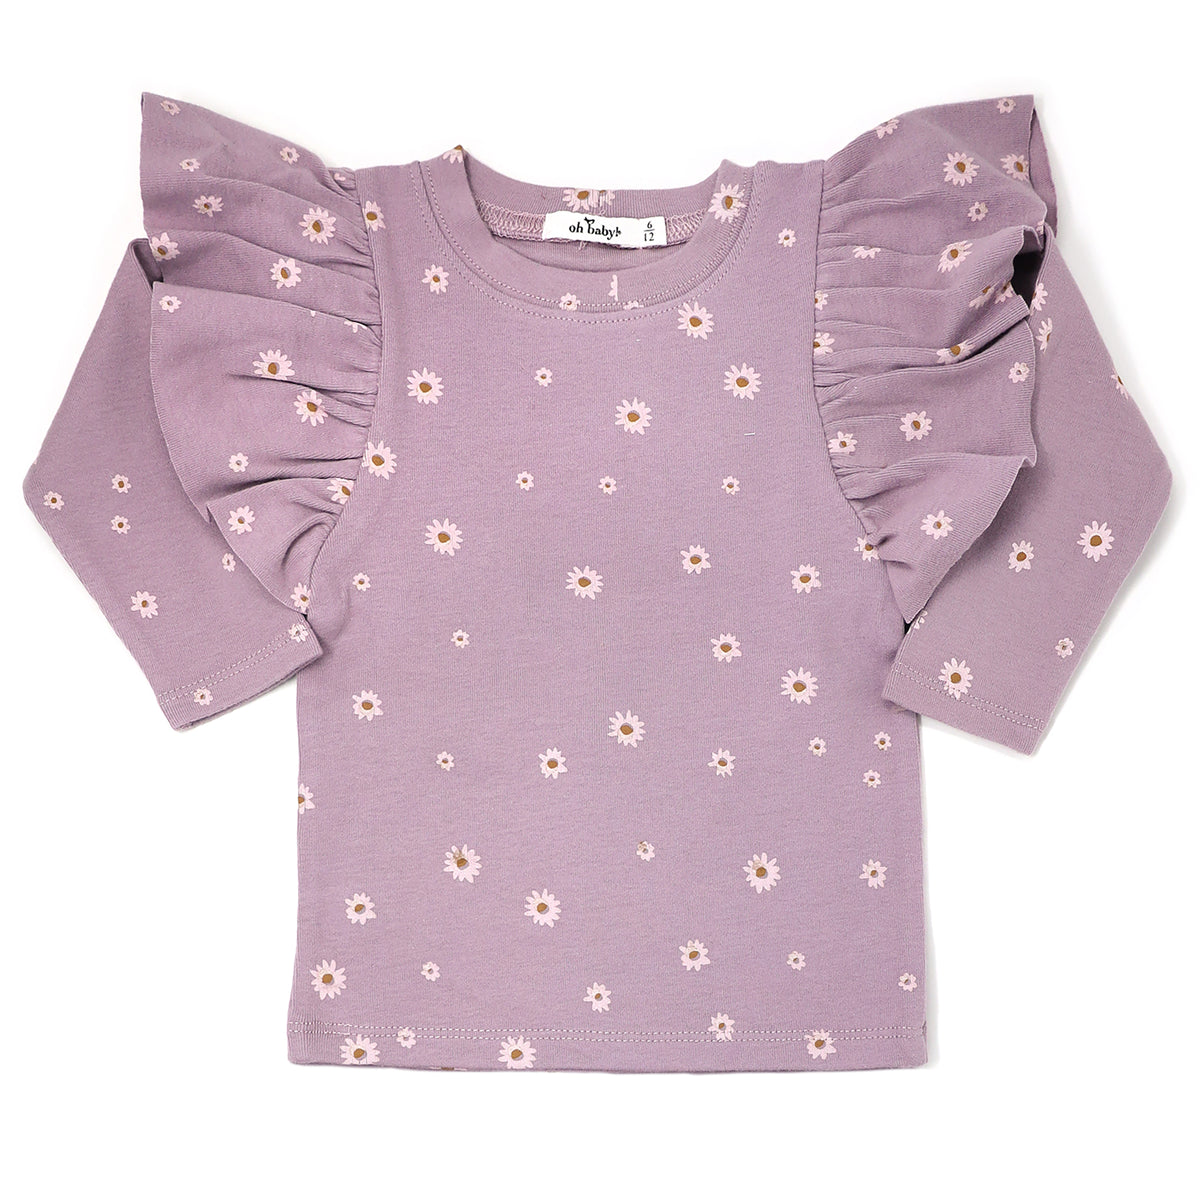 oh baby! Pink Daisies Butterfly Sleeve Long Sleeve Tee - Dusty Lavender